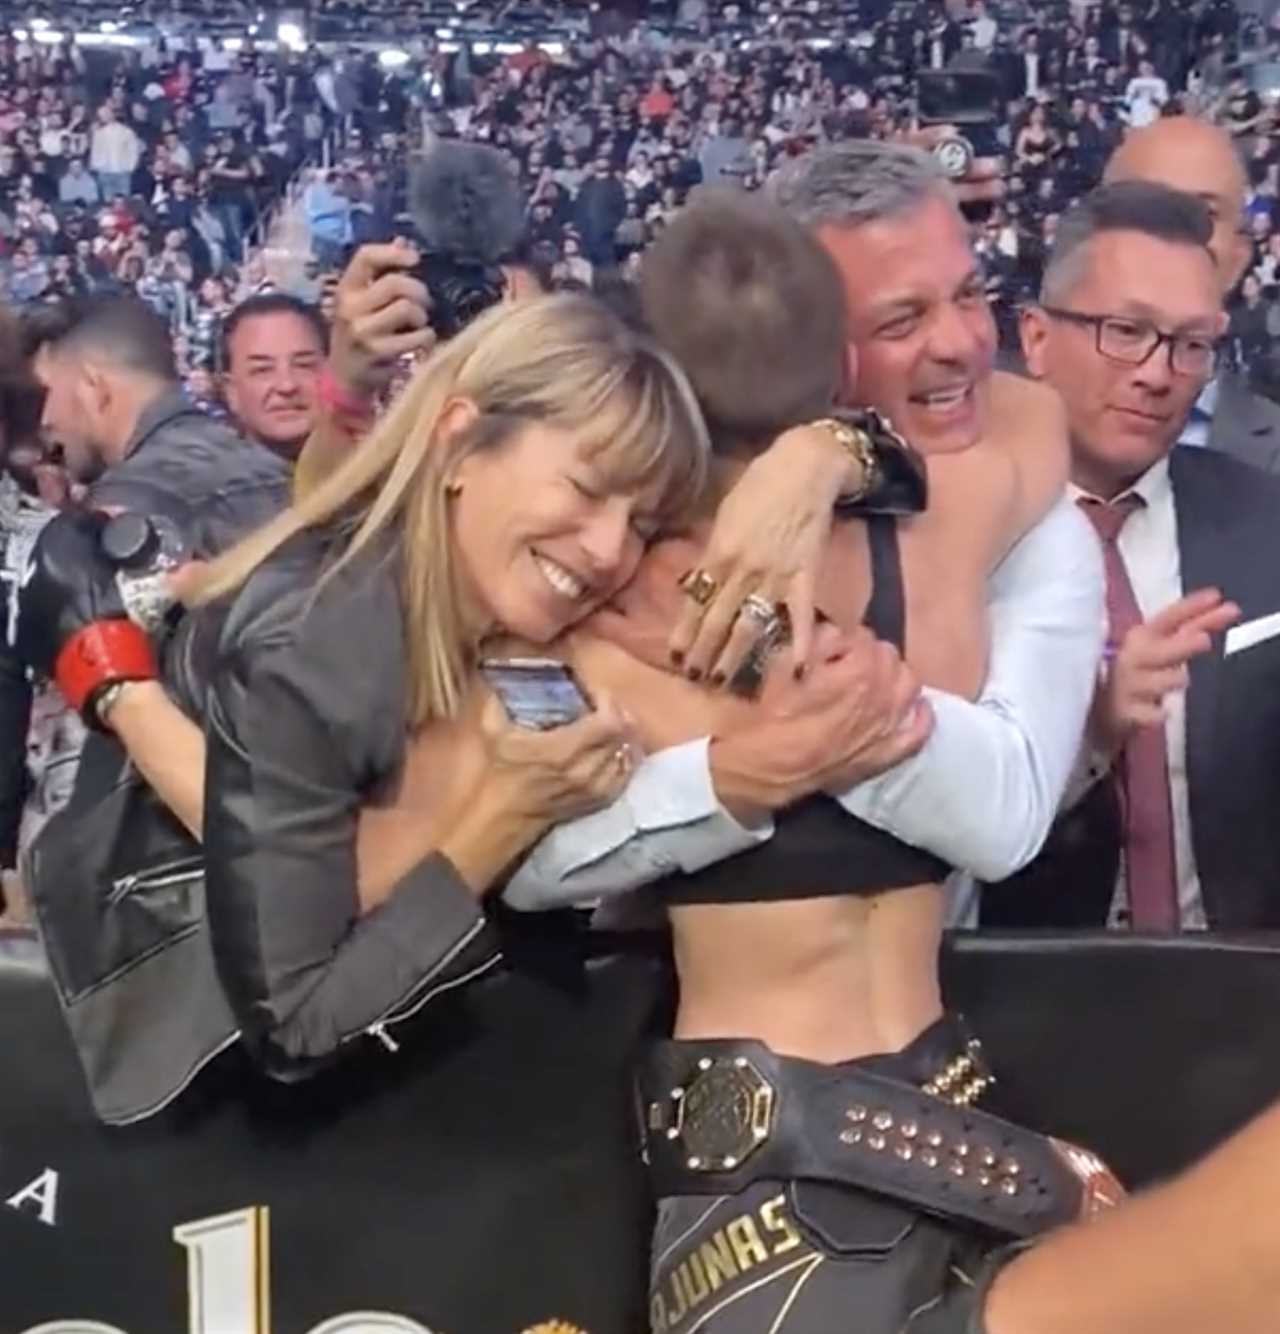 Rose Namajunas, after beating Zhang Weili in UFC 268 shares a touching moment with her parents.